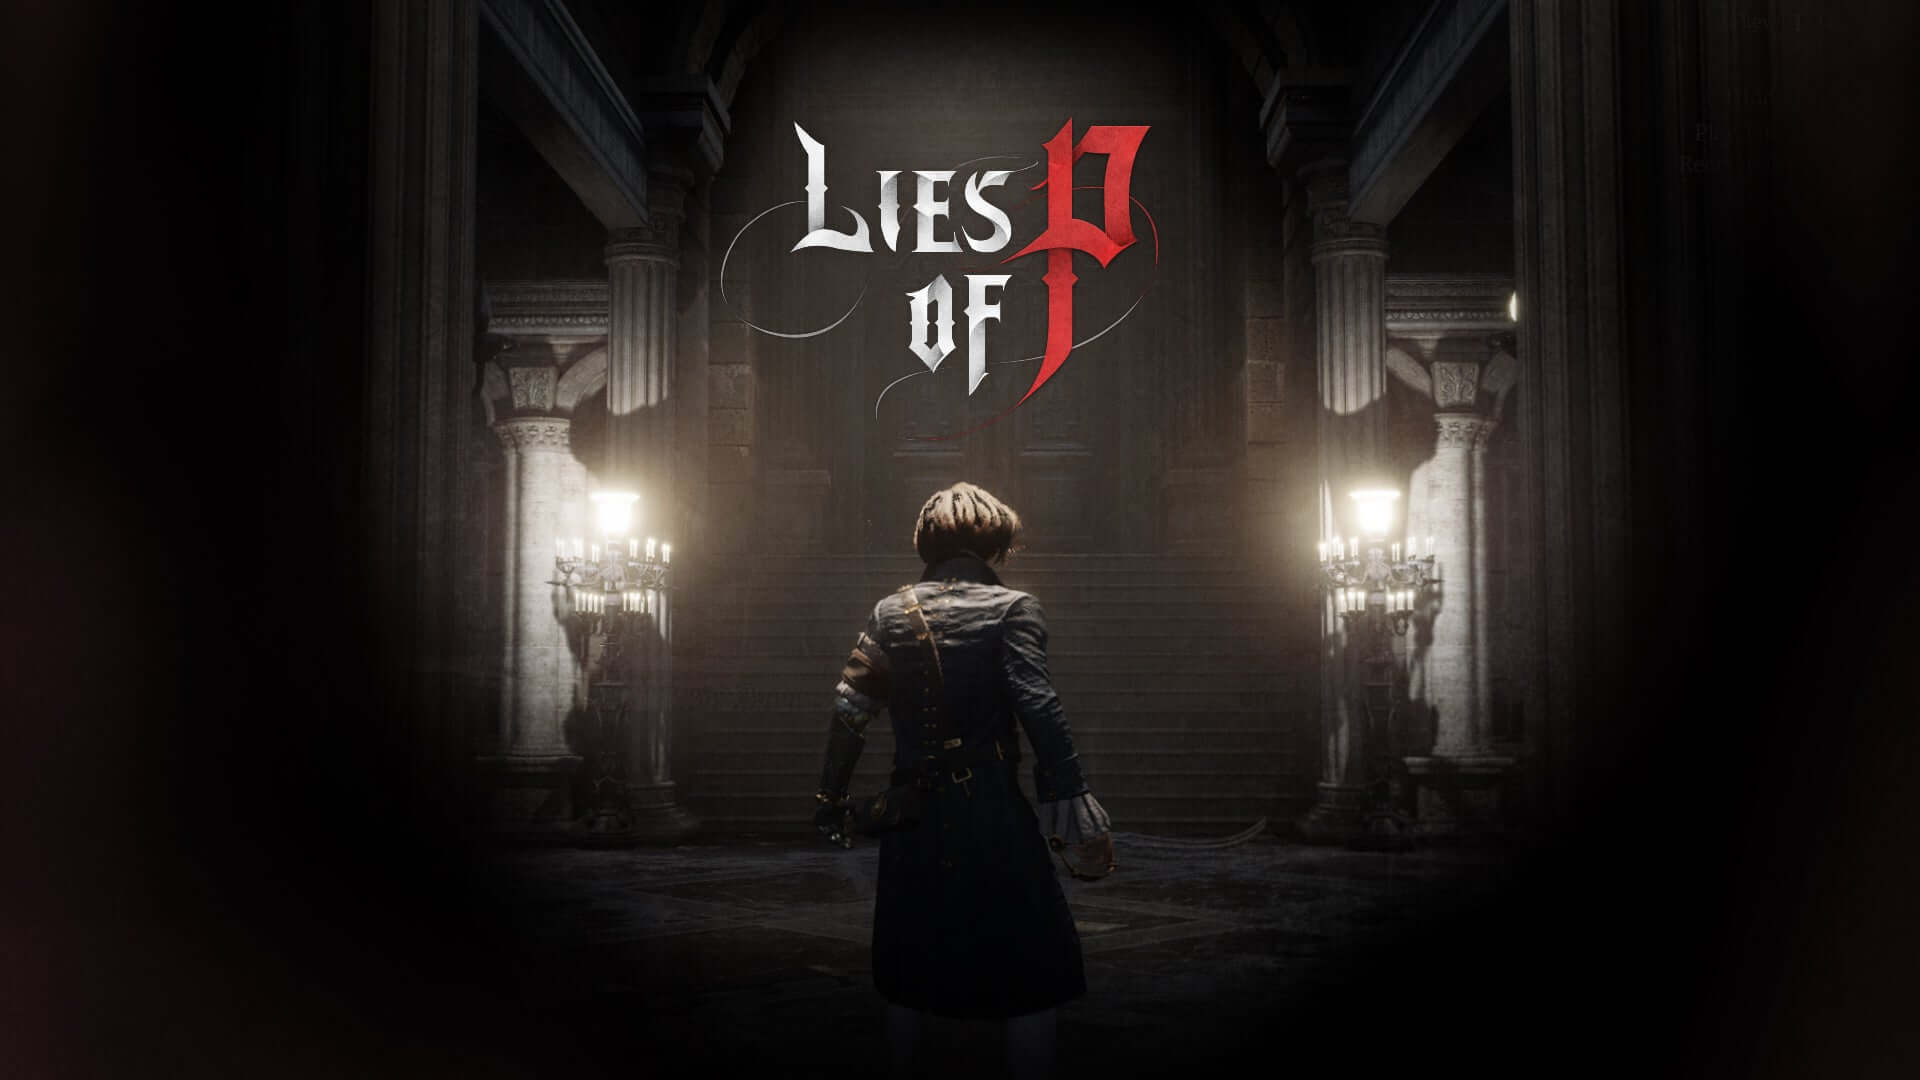 Lies of P is my biggest gaming surprise of the year — and the Bloodborne  sequel we deserve